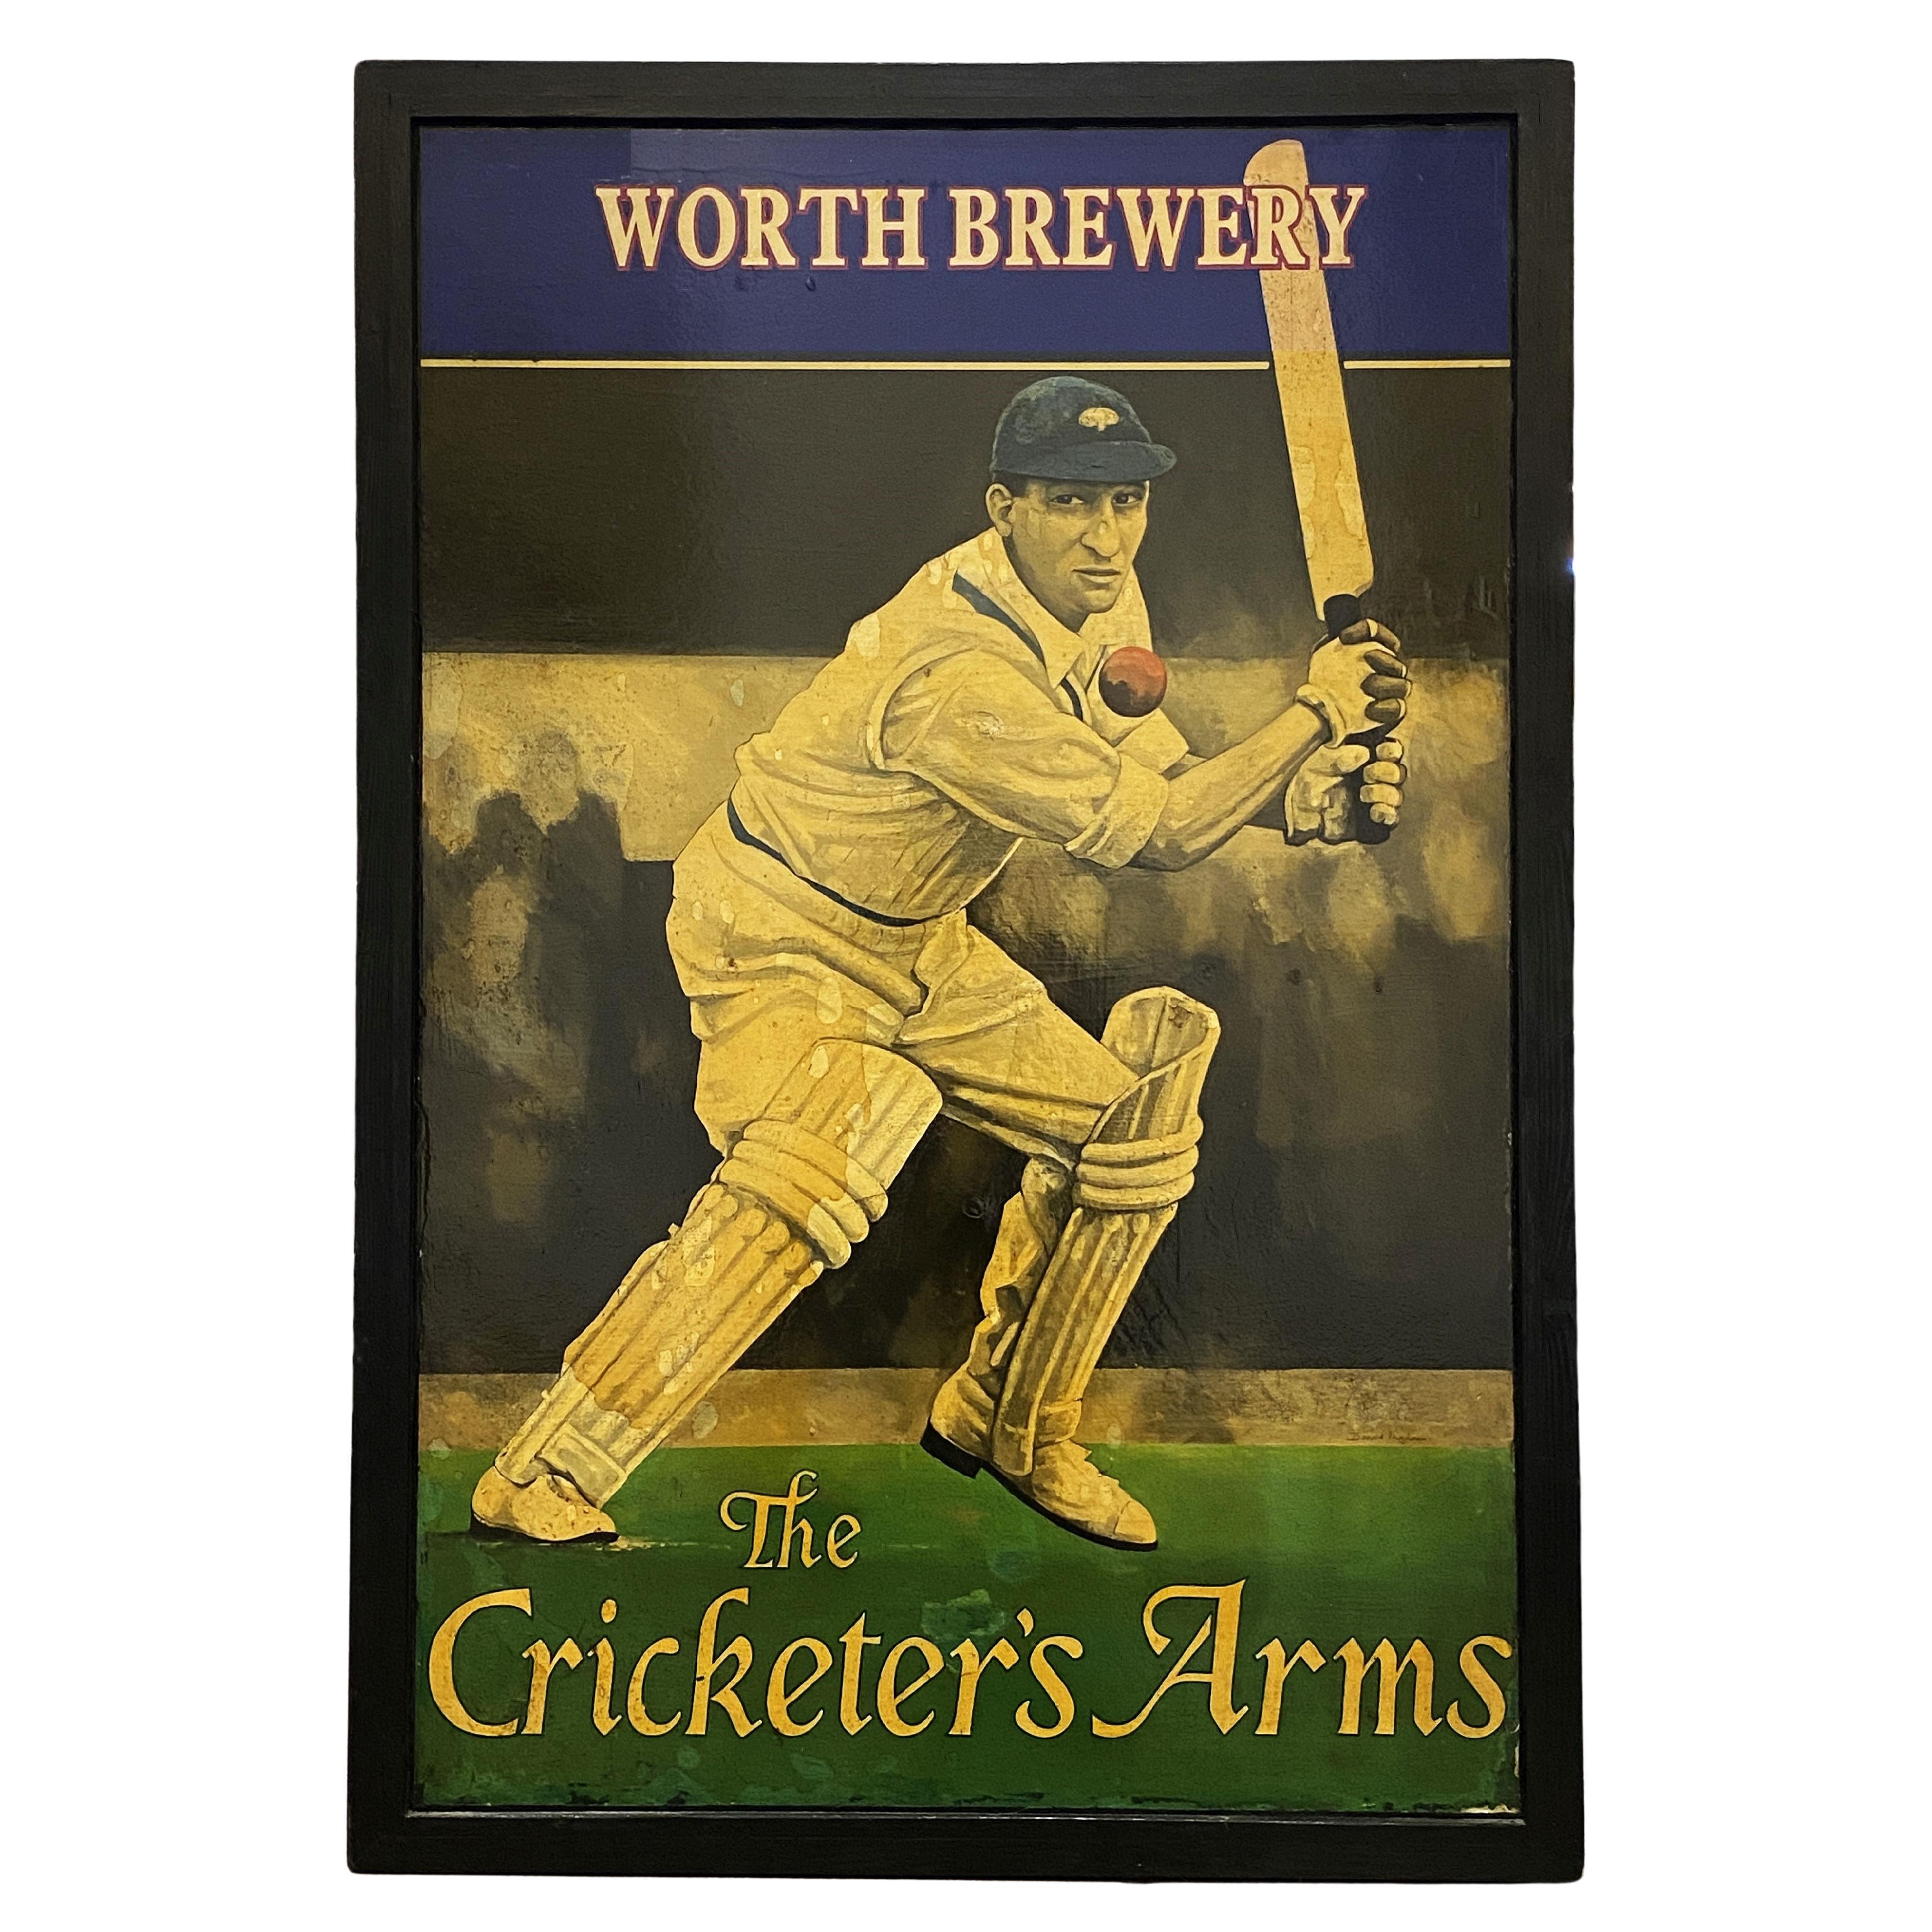 English Pub Sign, "Worth Brewery - The Cricketer's Arms"